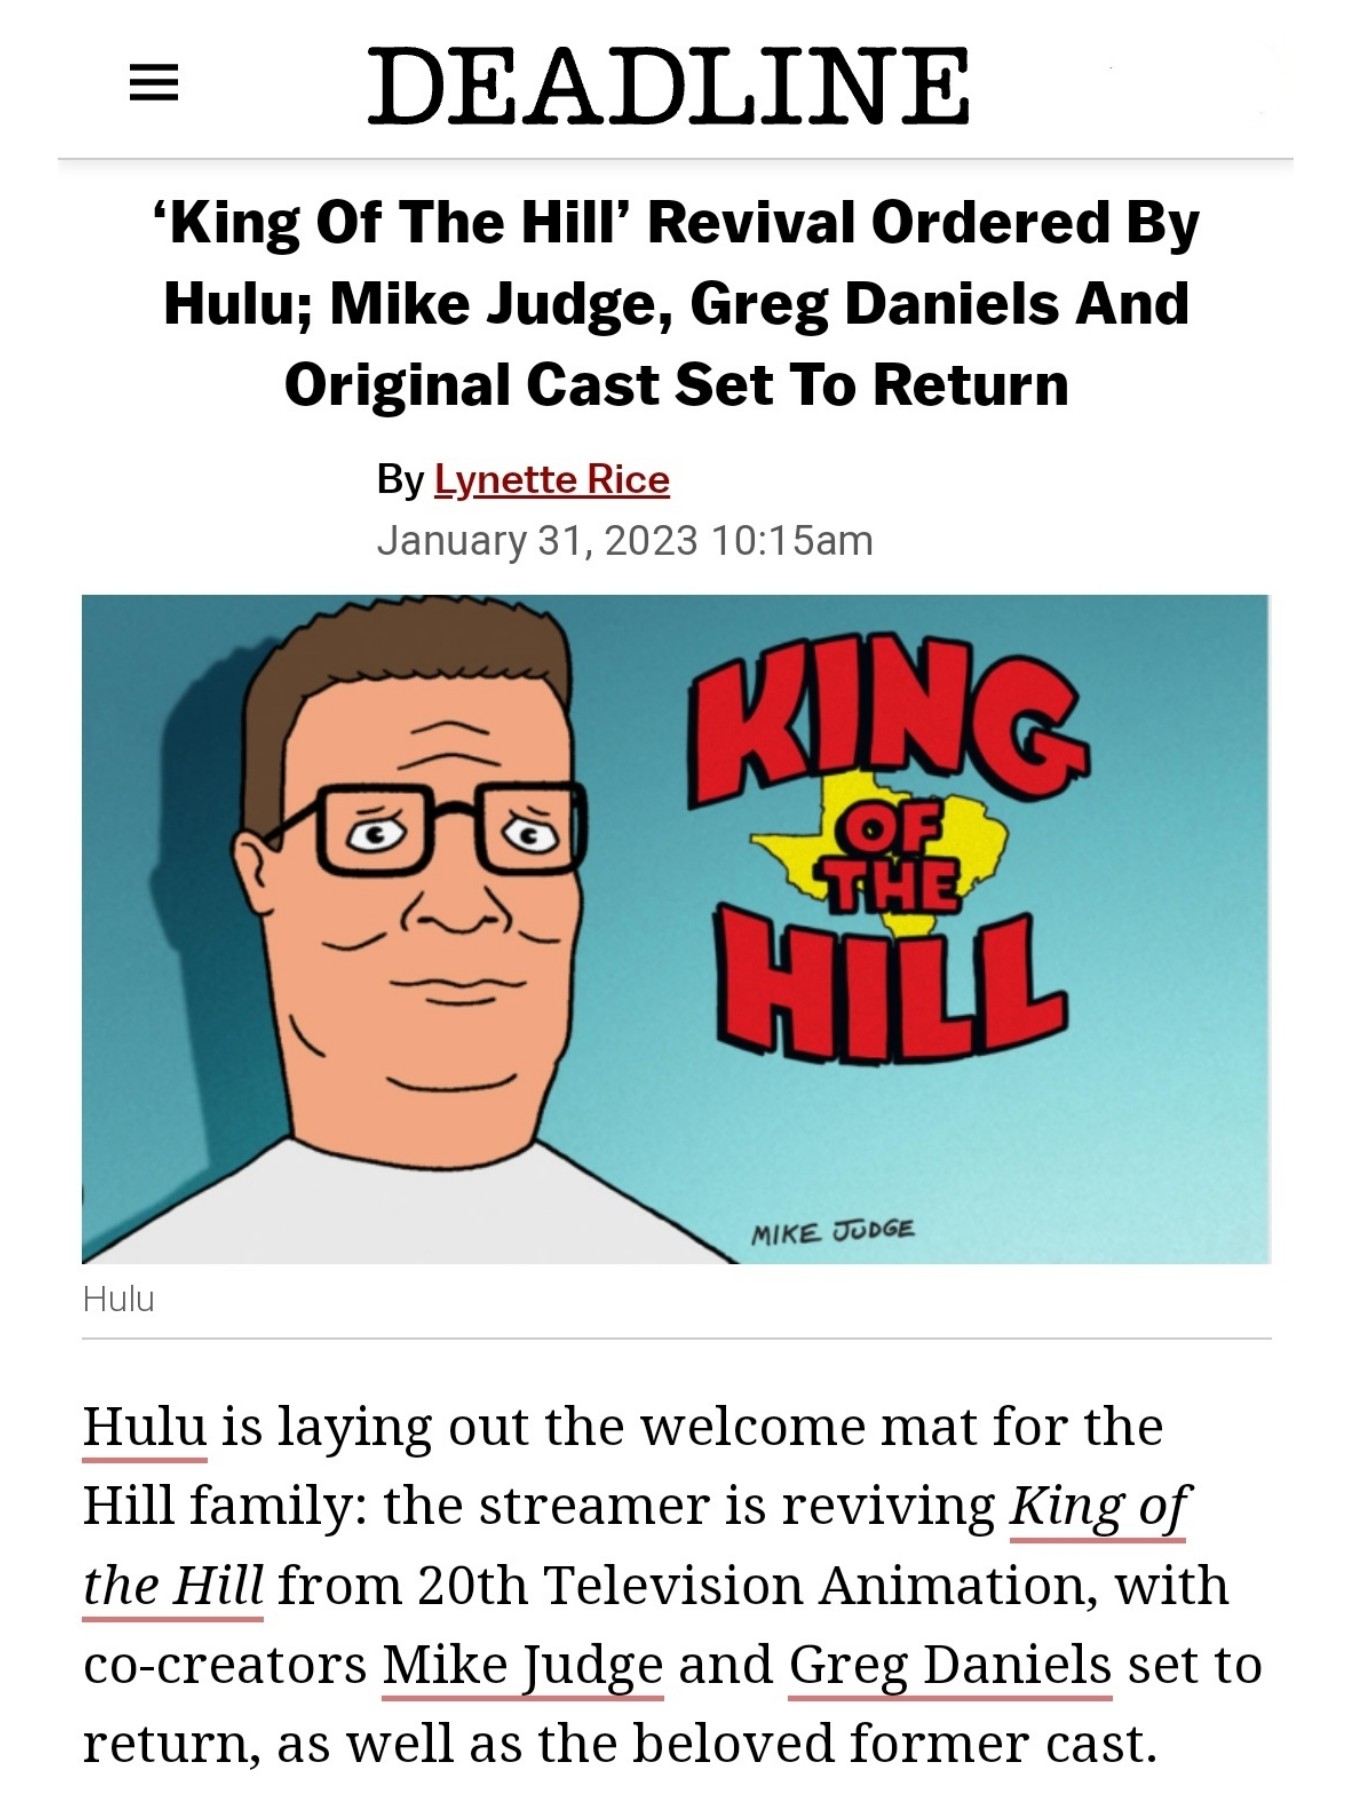 King Of The Hill Revival With Original Cast & Creators Coming To